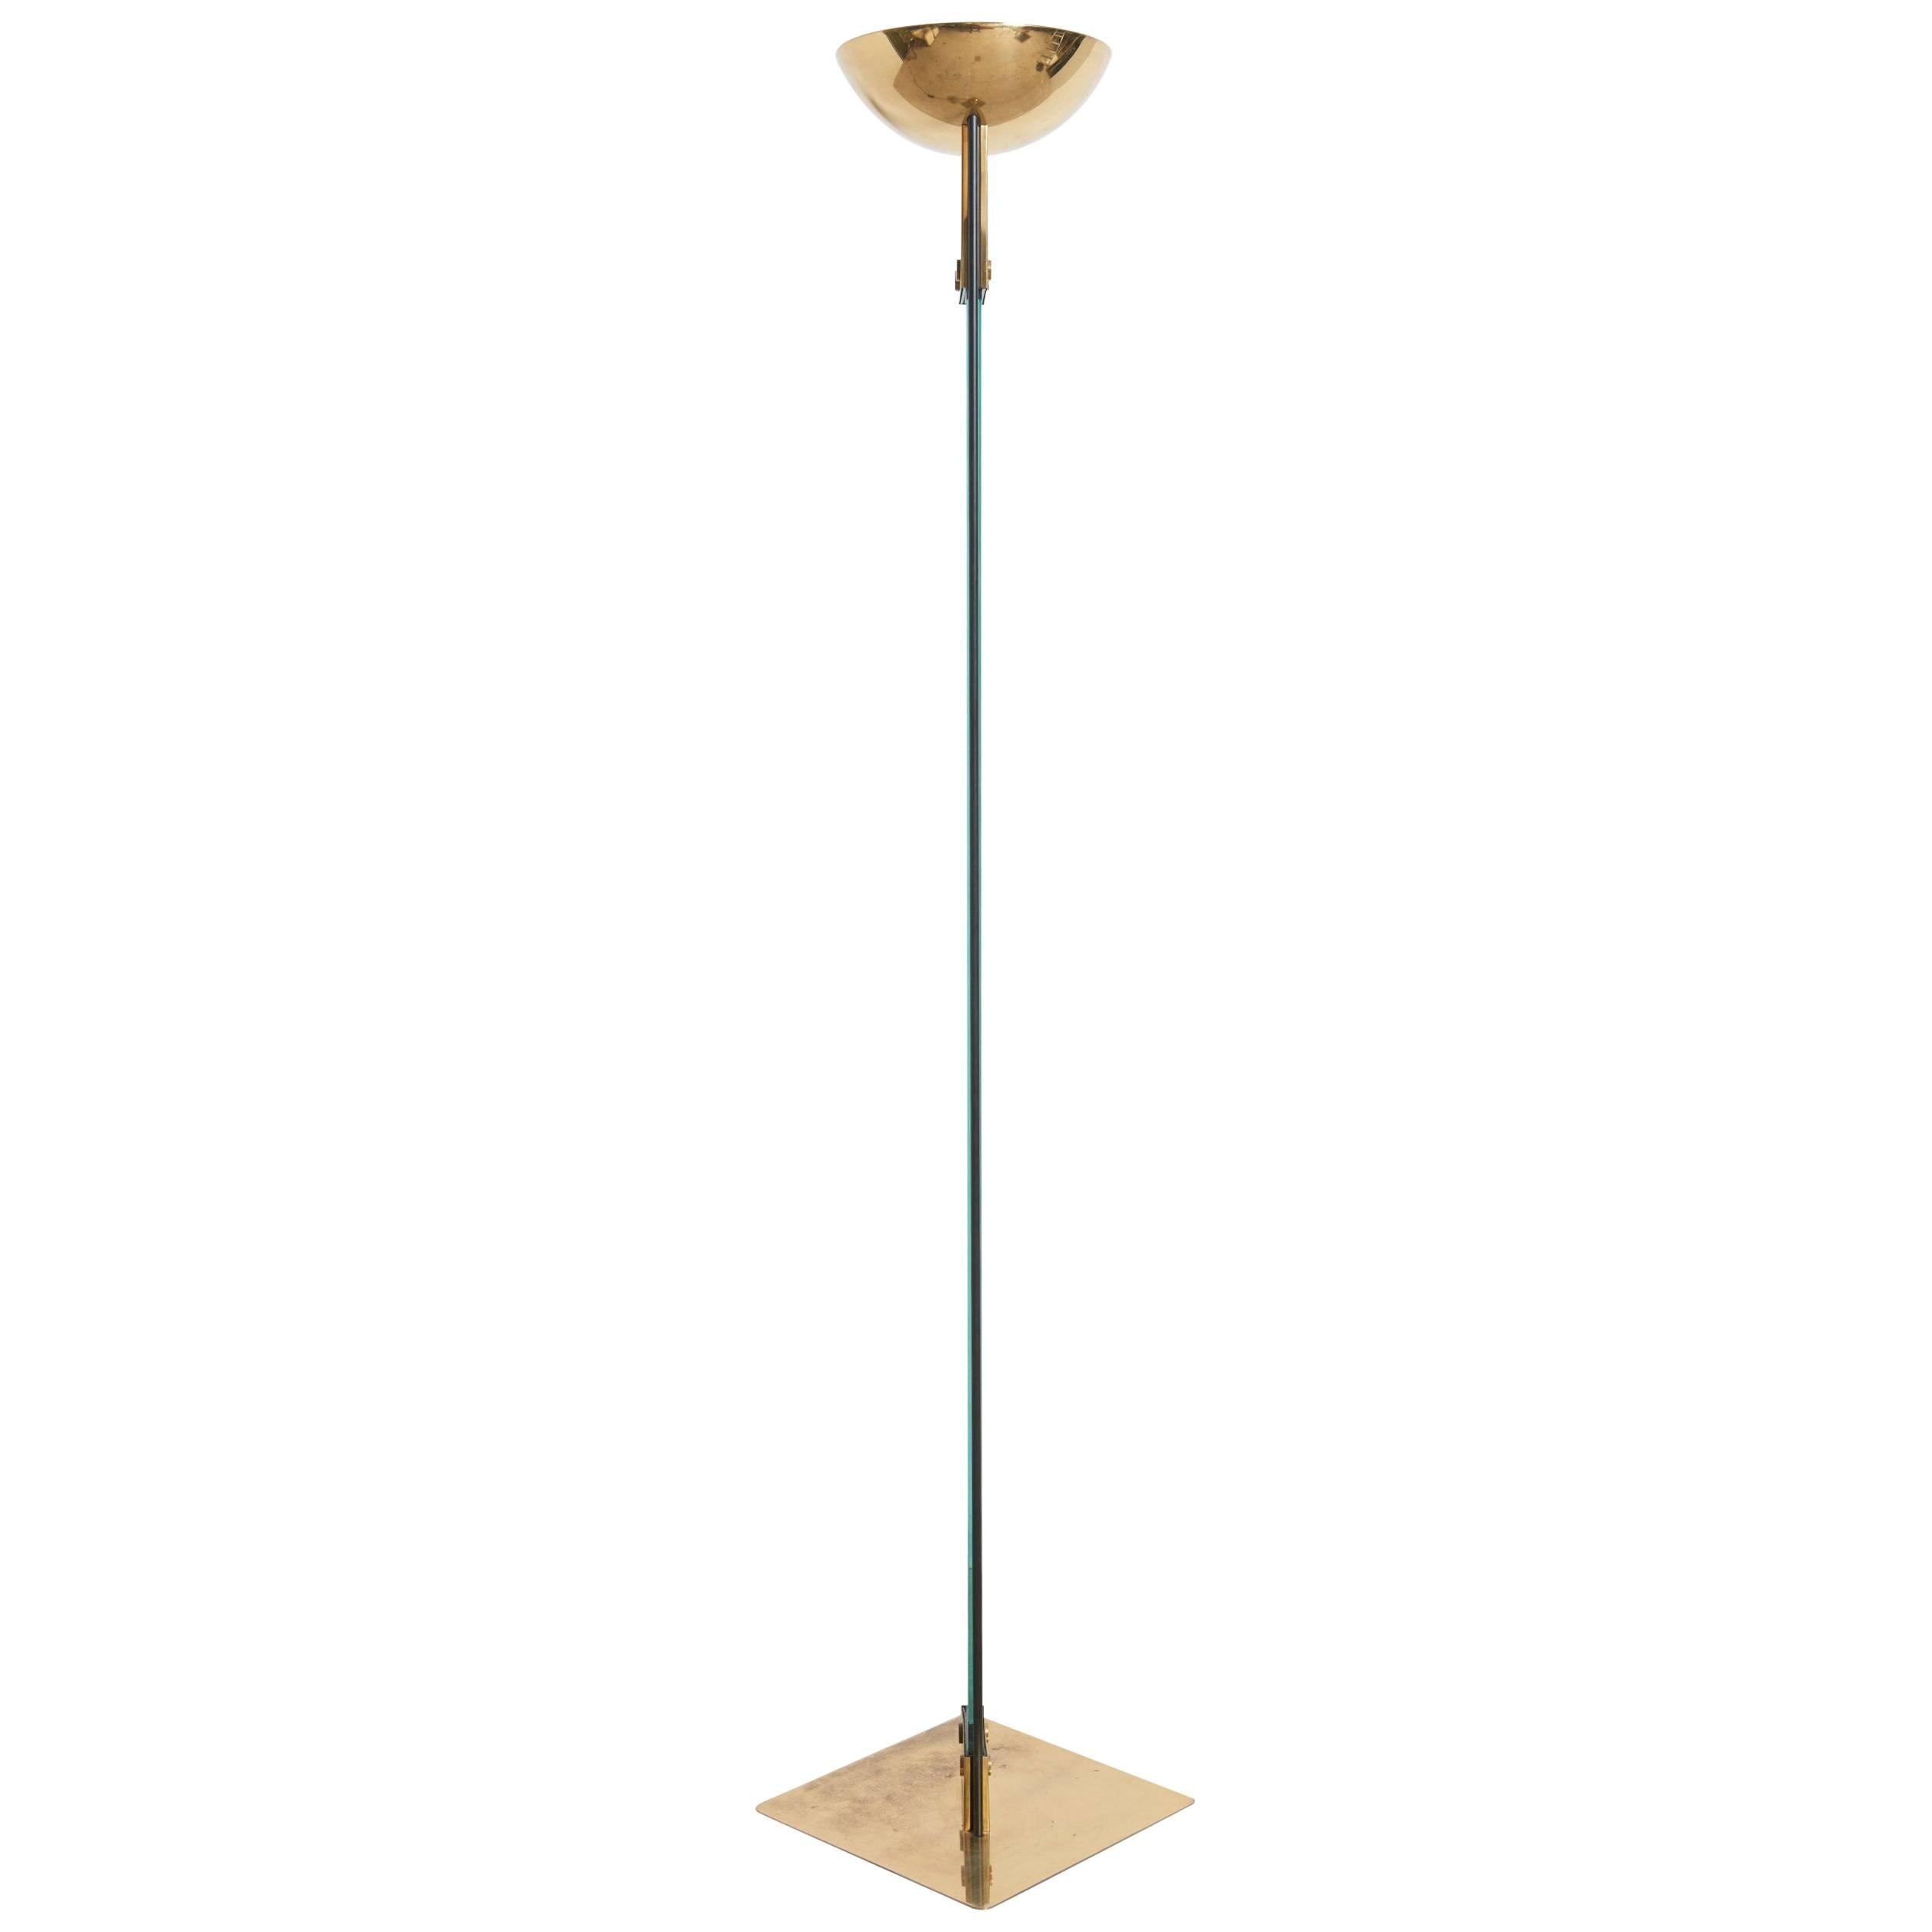 Italian Brass and Glass "Laser" Floor Lamp by Max Baguara for Lamperti, Italy